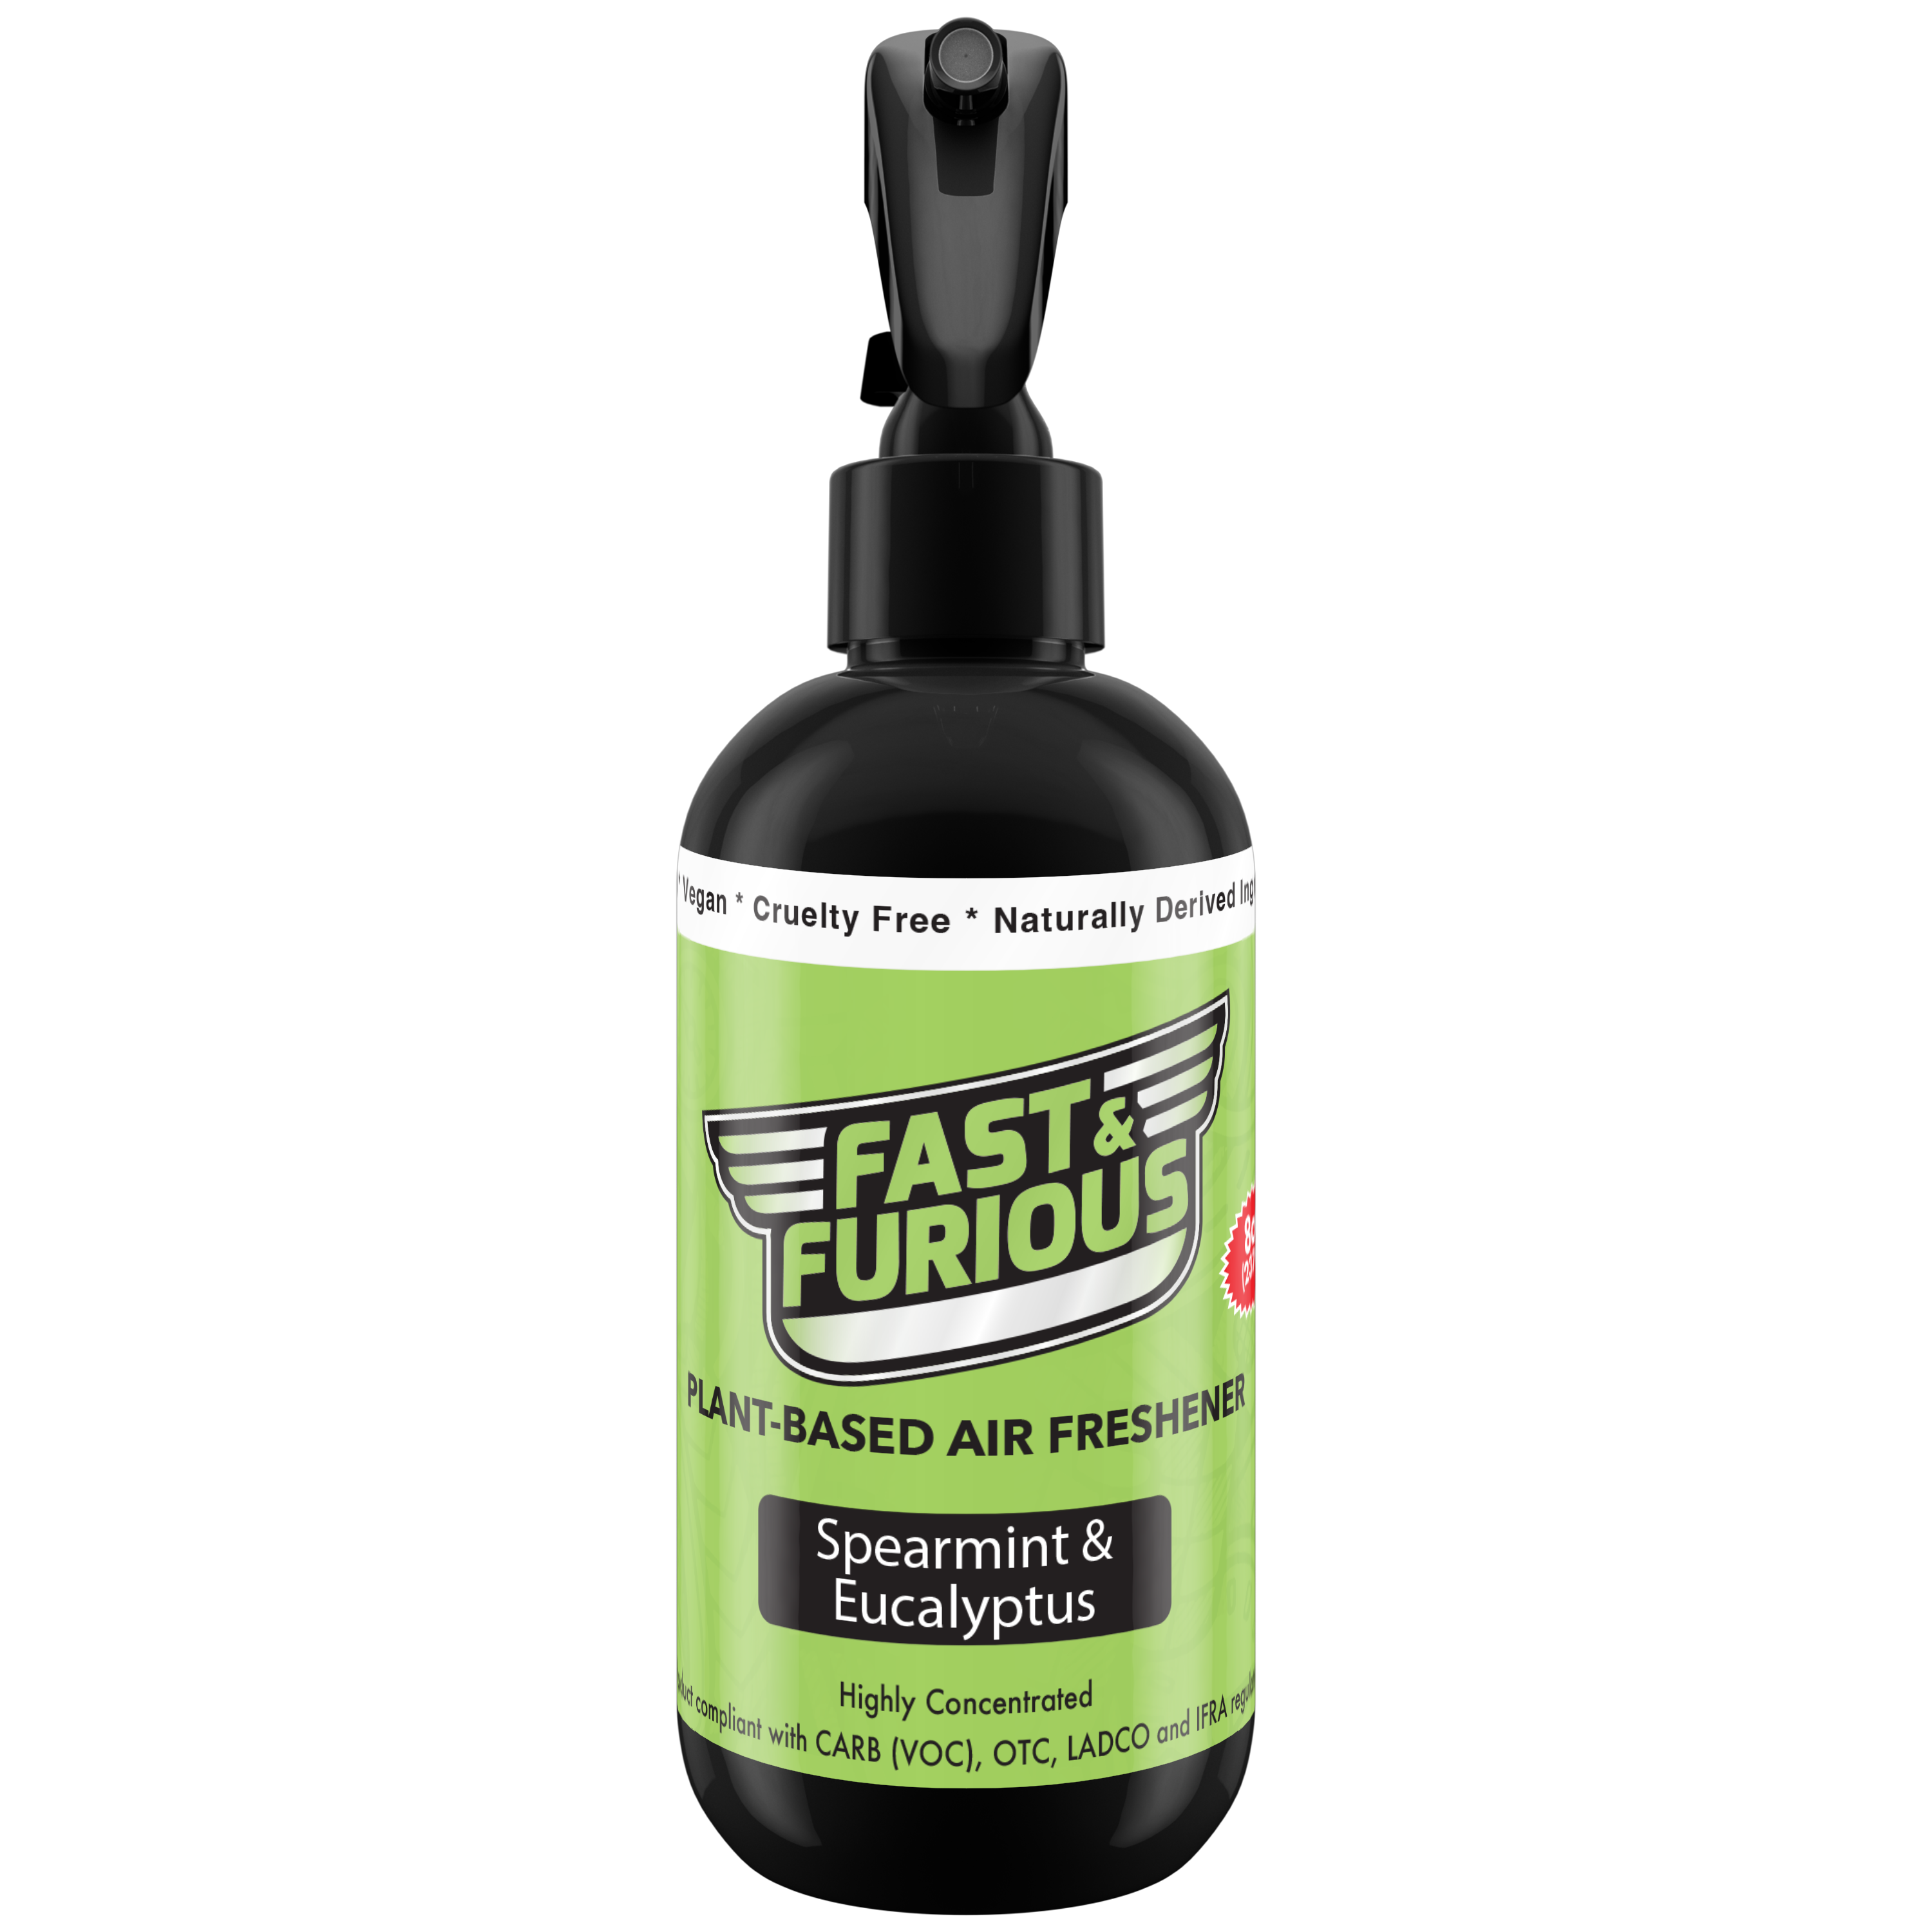 Fast and Furious Plant-Based Air Freshener - Spearmint & Eucalyptus Scent